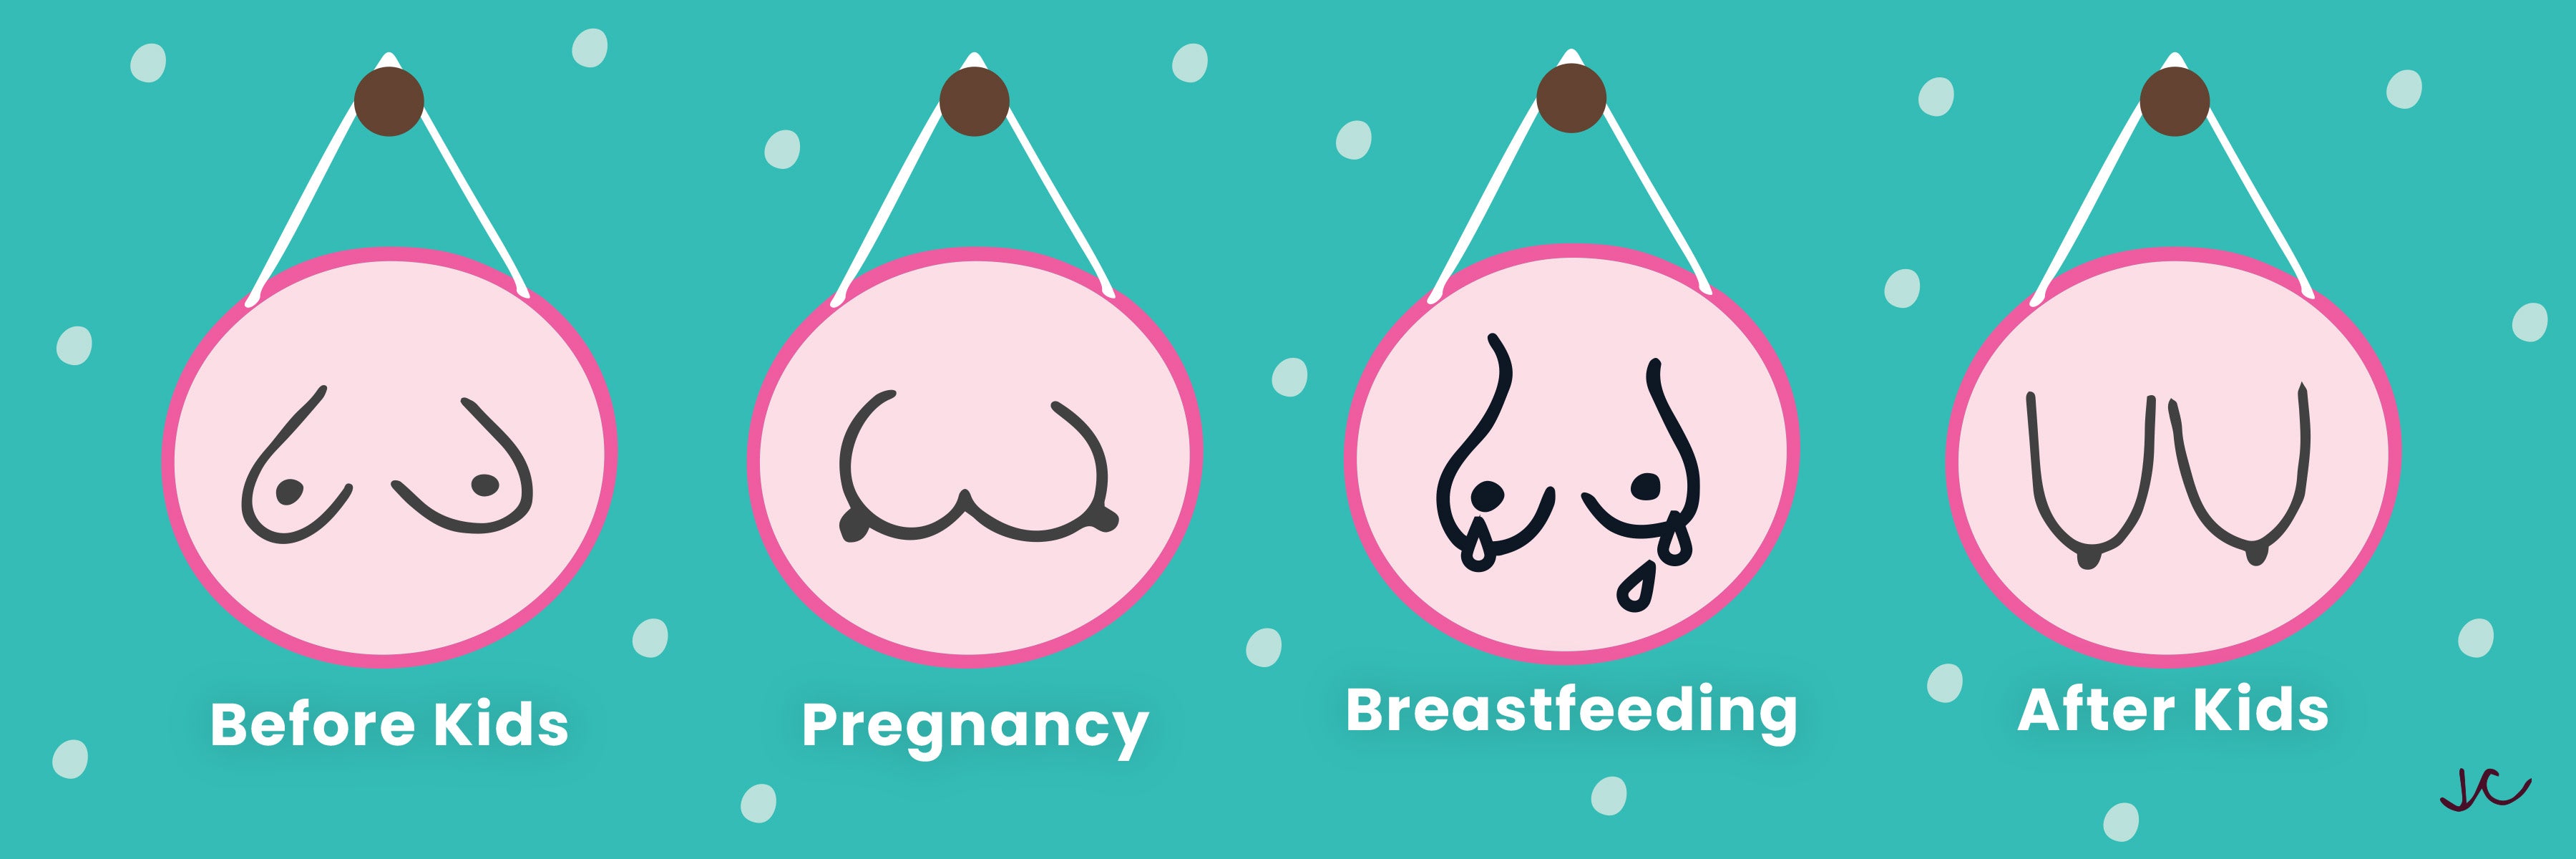 Our Guide to Breasts Before and After Breastfeeding: Before Kids, Pregnancy, Breastfeeding, After kids